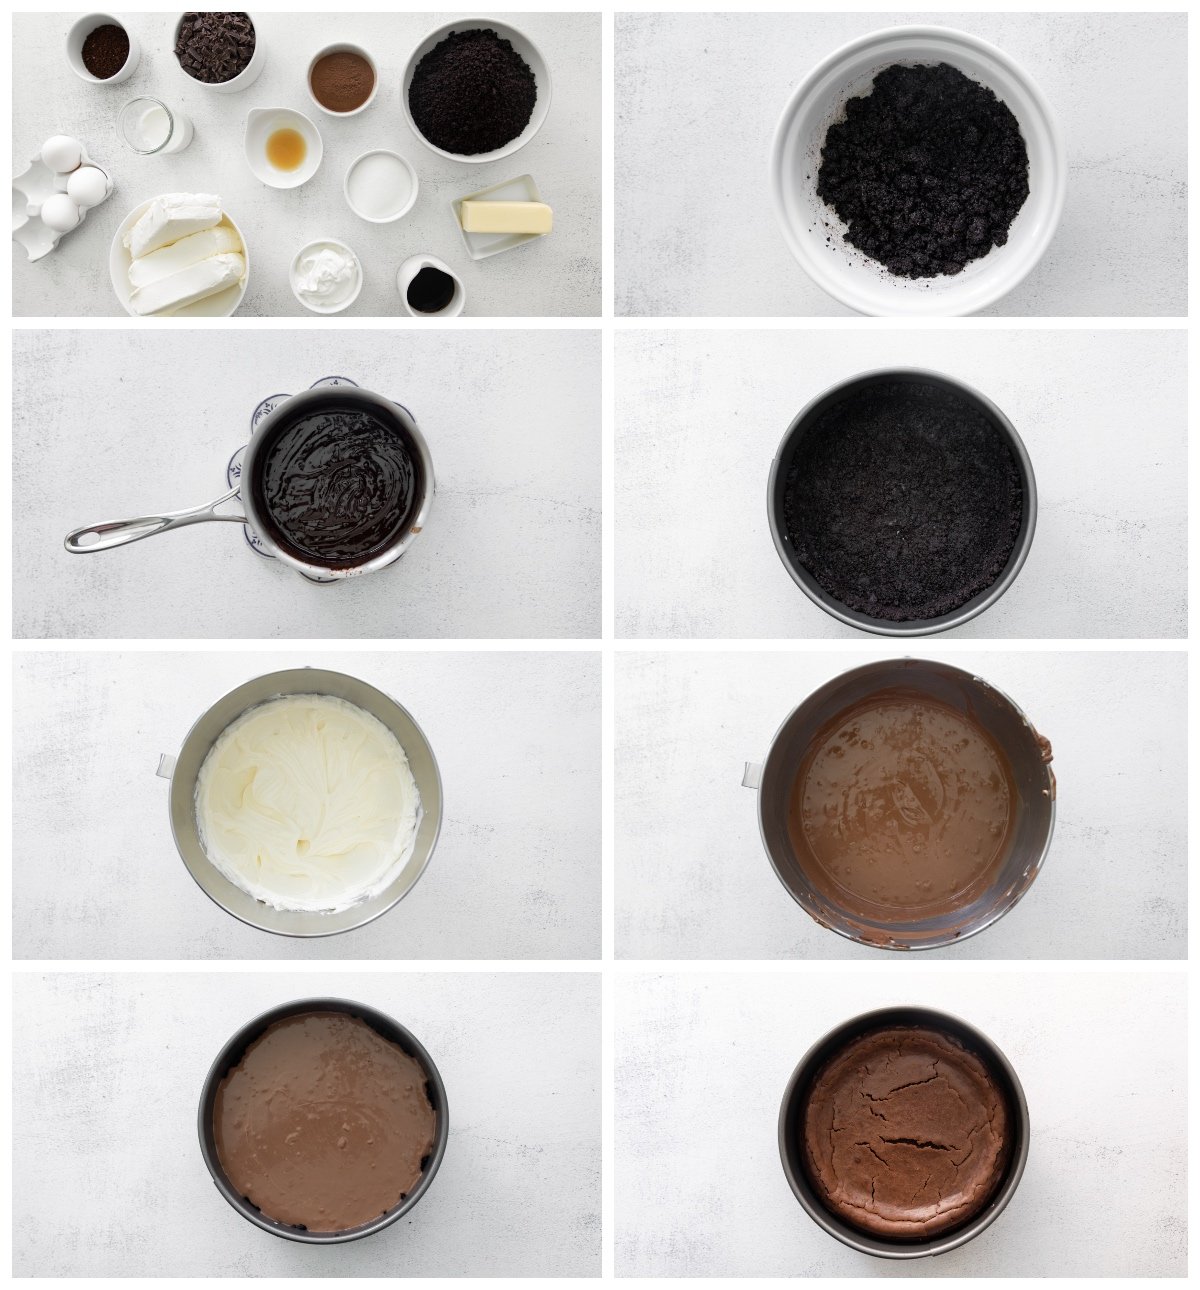 how to make mocha cheesecake step by step photo instructions